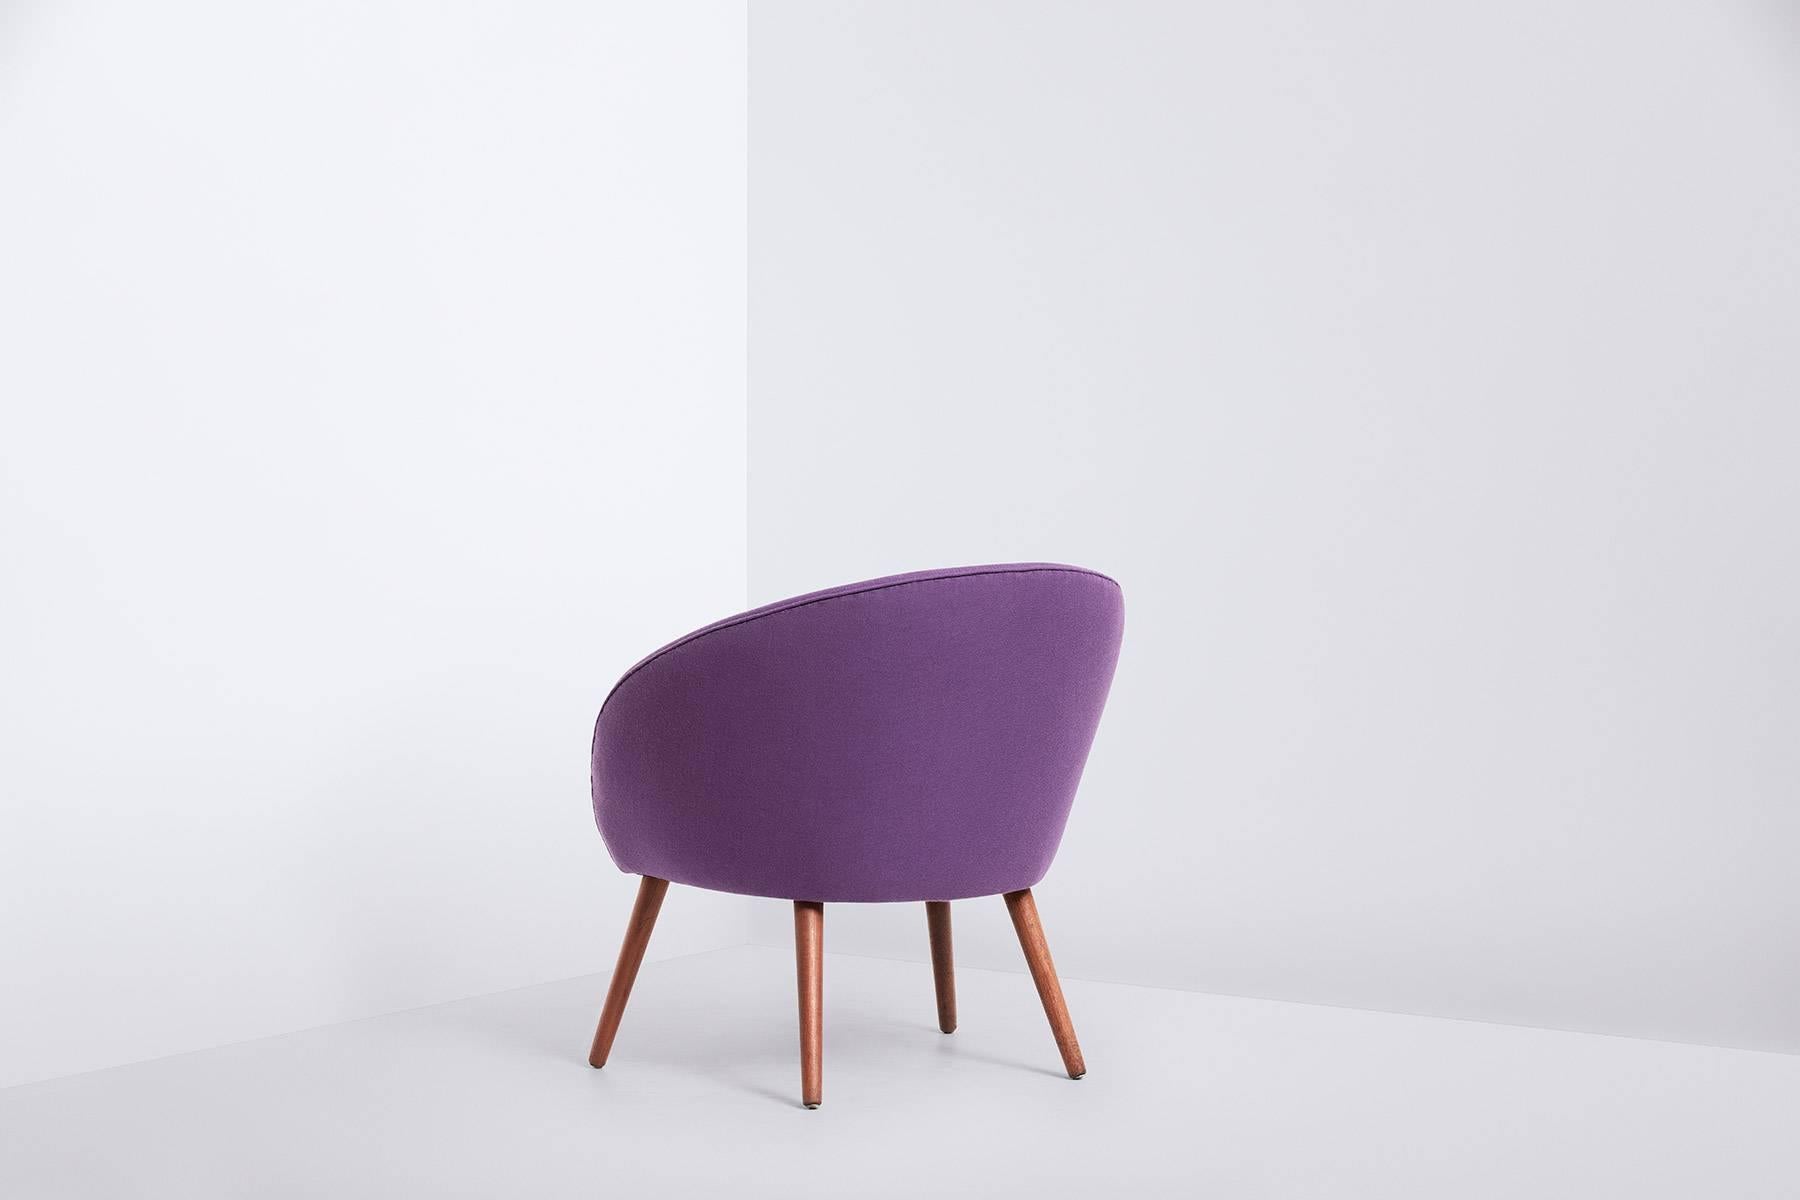 Mid-Century Modern Danish Produced Cocktail Chair, 1950s, Orange and Purple Wool Upholstery For Sale